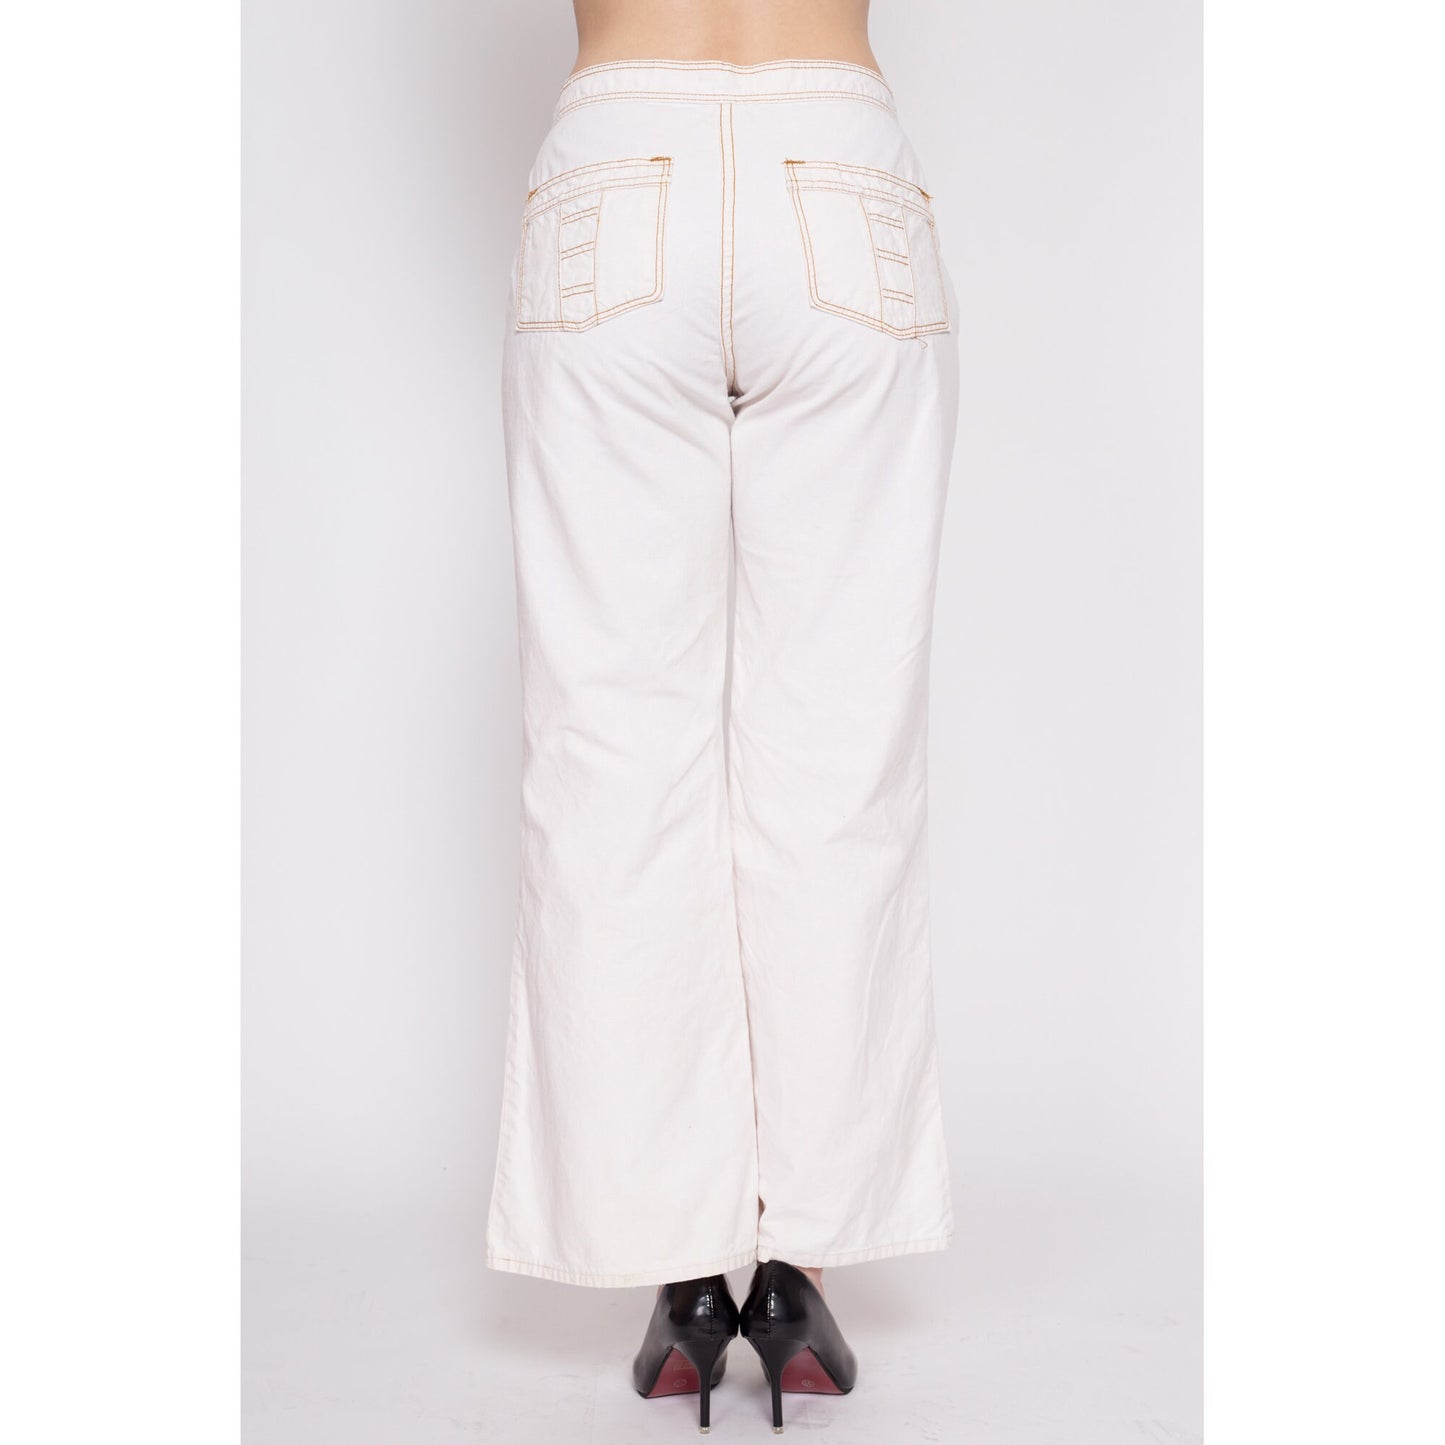 70s White Cotton Contrast Stitch Bell Bottoms - Men's Small, Women's Medium | Vintage Boho High Waisted Flared Pants